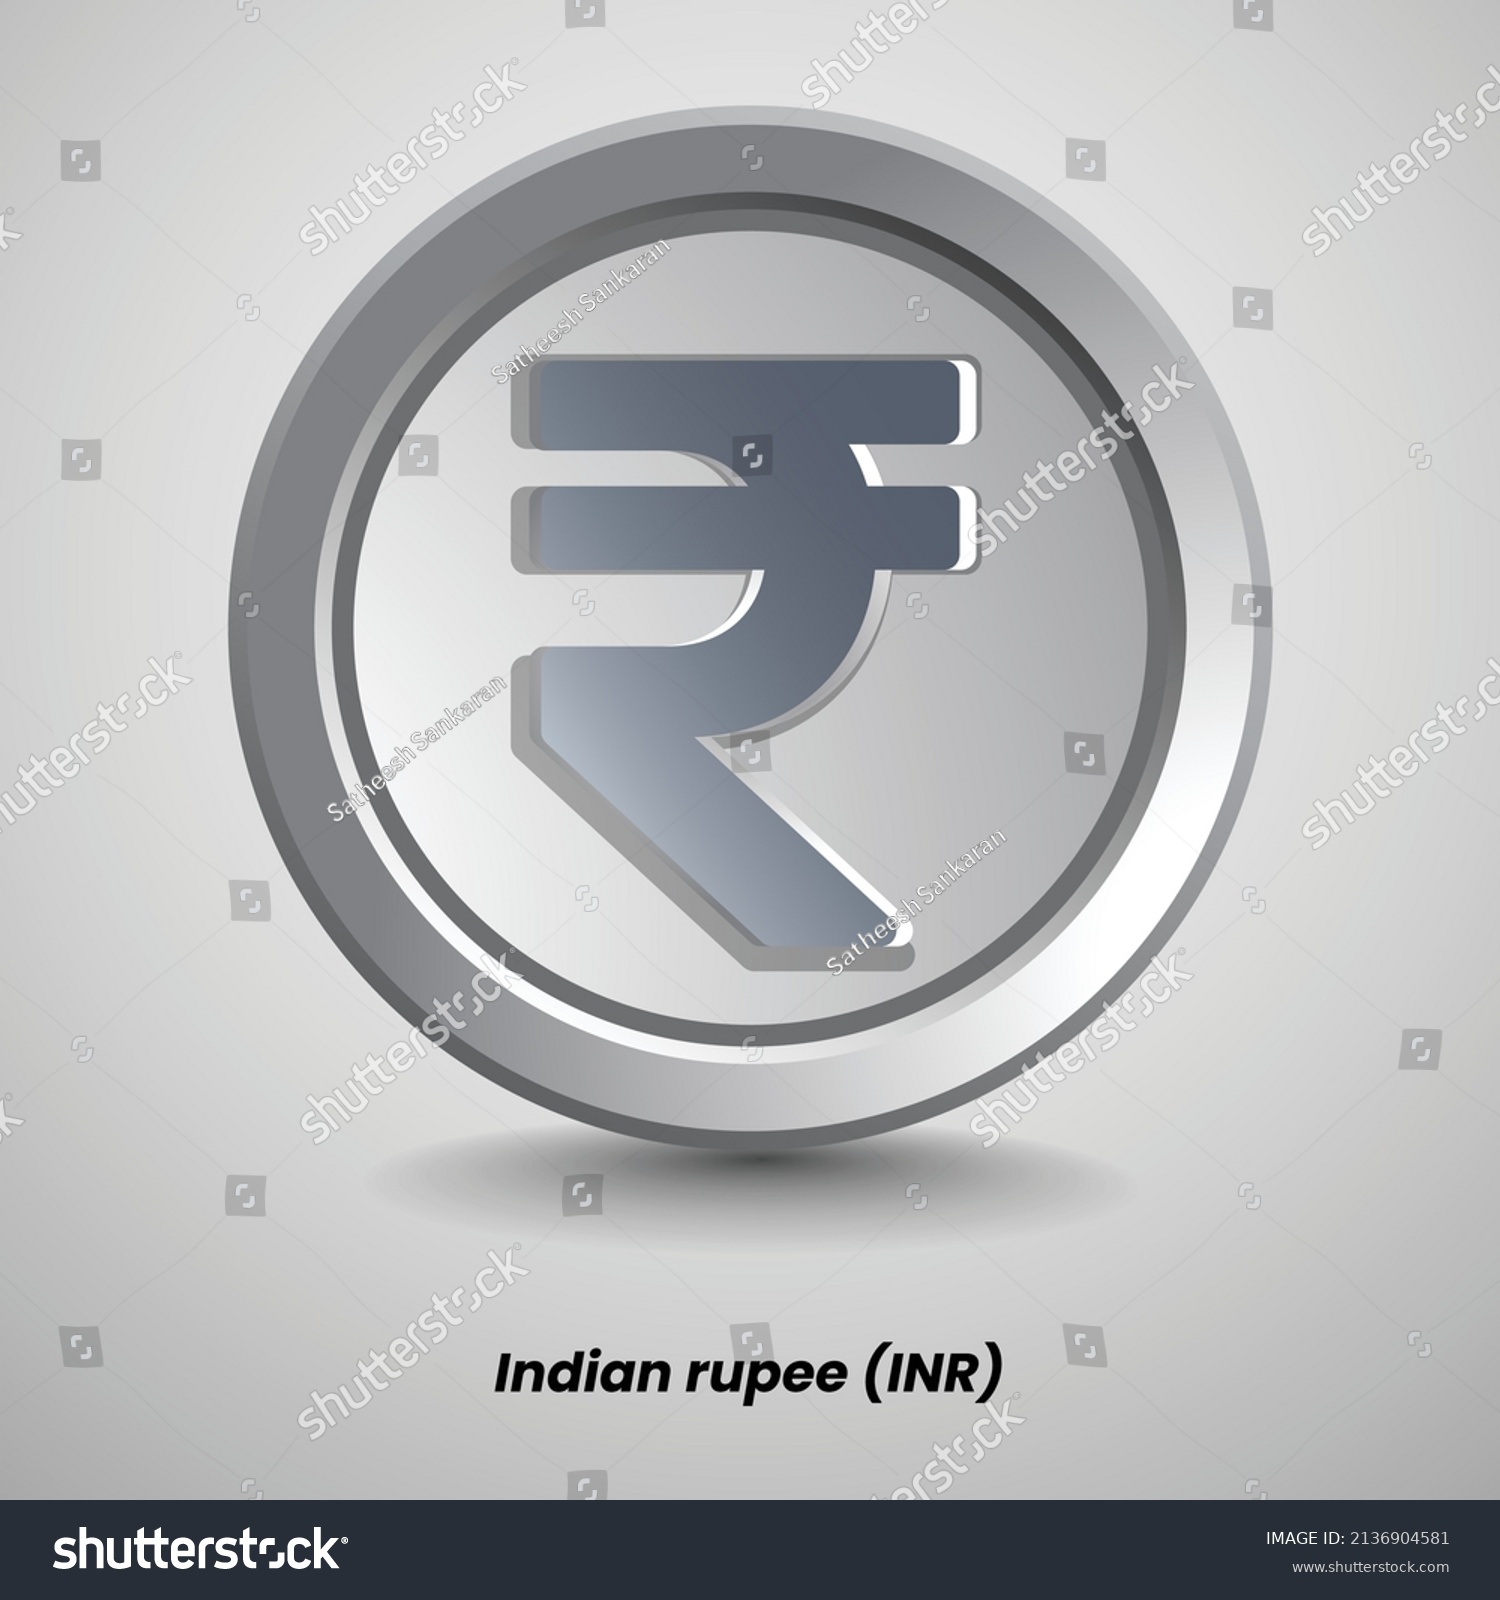 SVG of Indian Rupee INR silver coin currency vector. Money symbol of India. Isolated coin illustration. svg